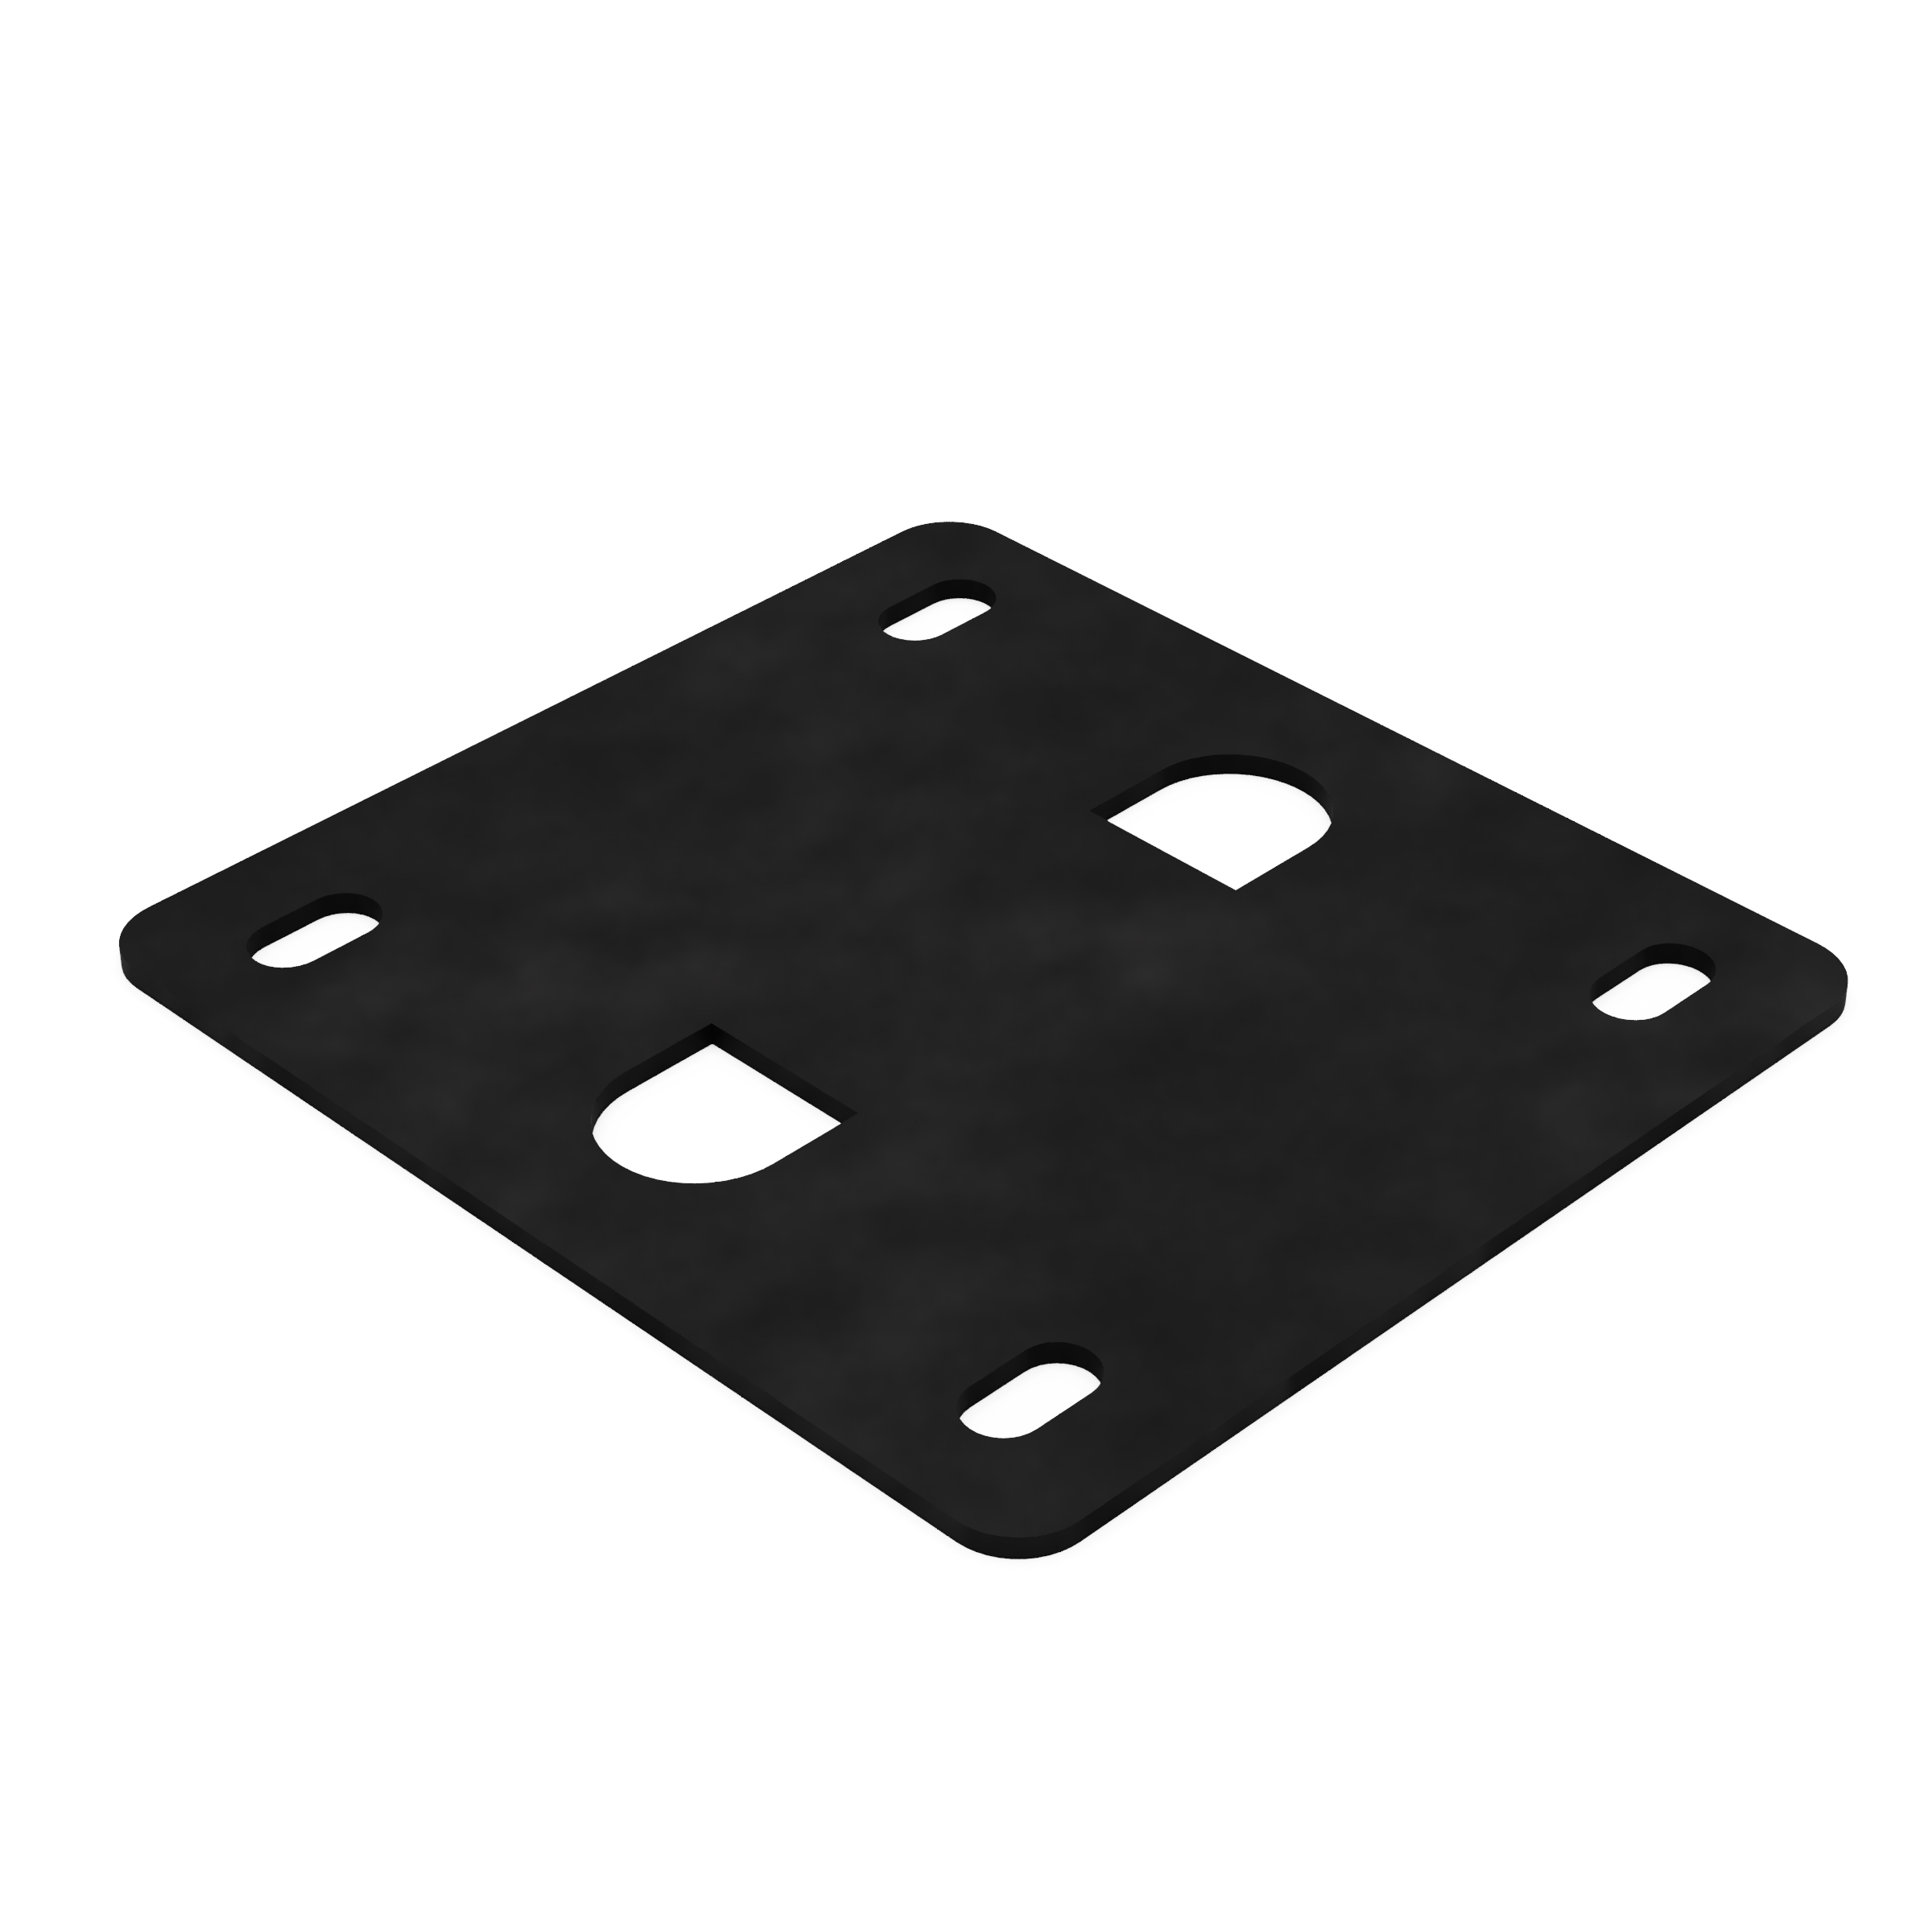 EI125 x 1 1/4" Vertical End Bell Mounting Pad/Insulator